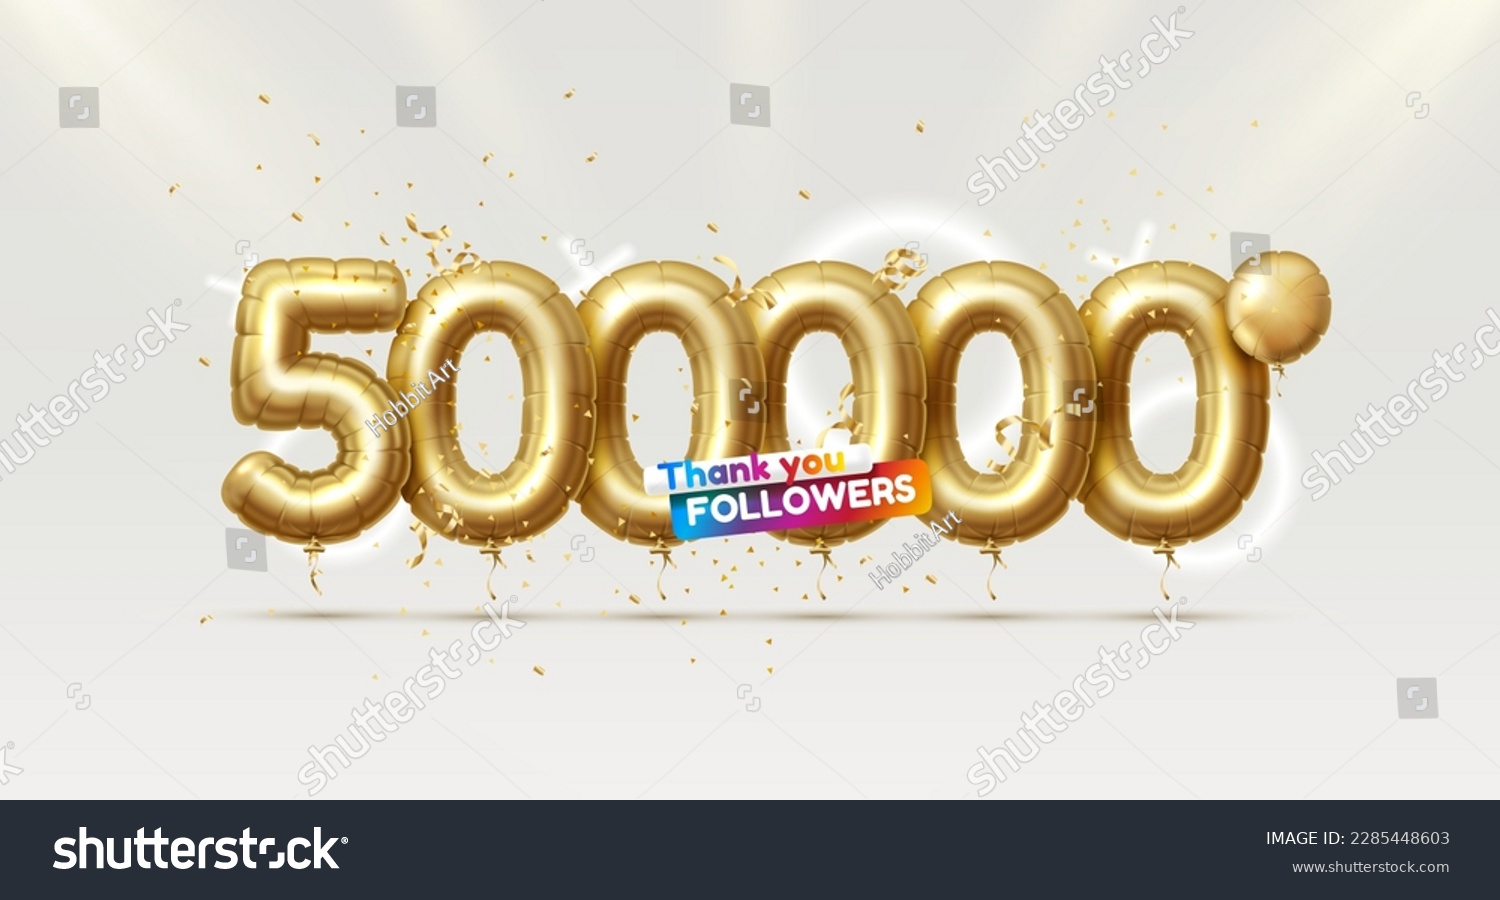 Thank you followers peoples, 500000 online social group, happy banner celebrate, Vector illustration #2285448603